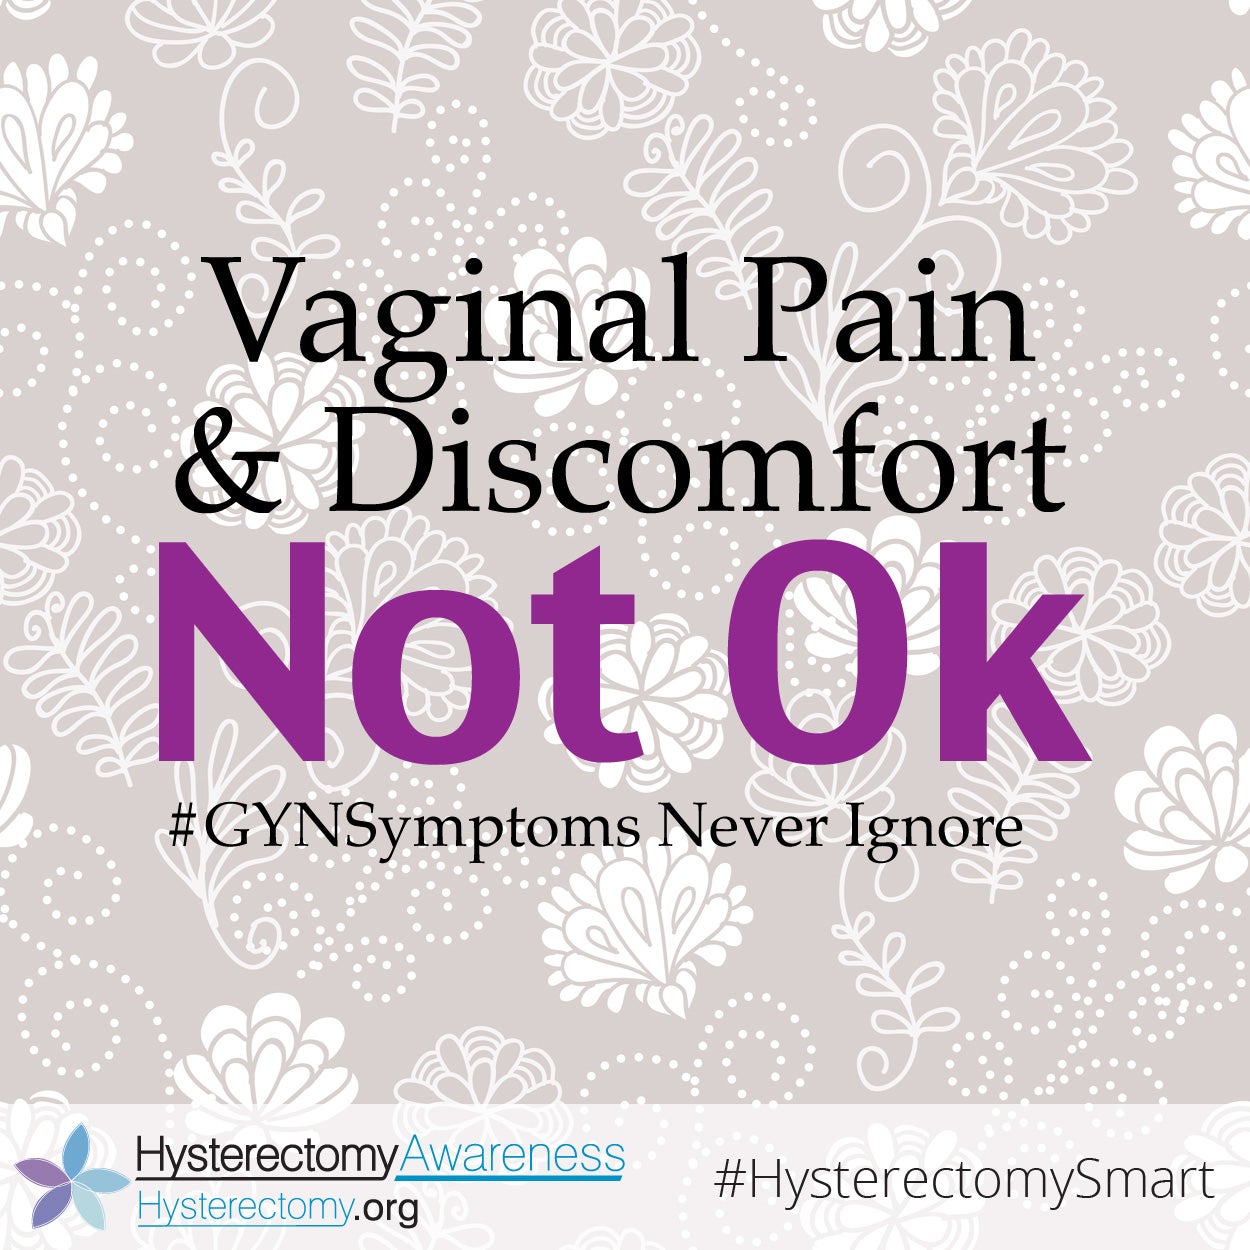 Vaginal Pain and Discomfort is Not Ok #HysterectomySmart #GYNSymptoms never ignore